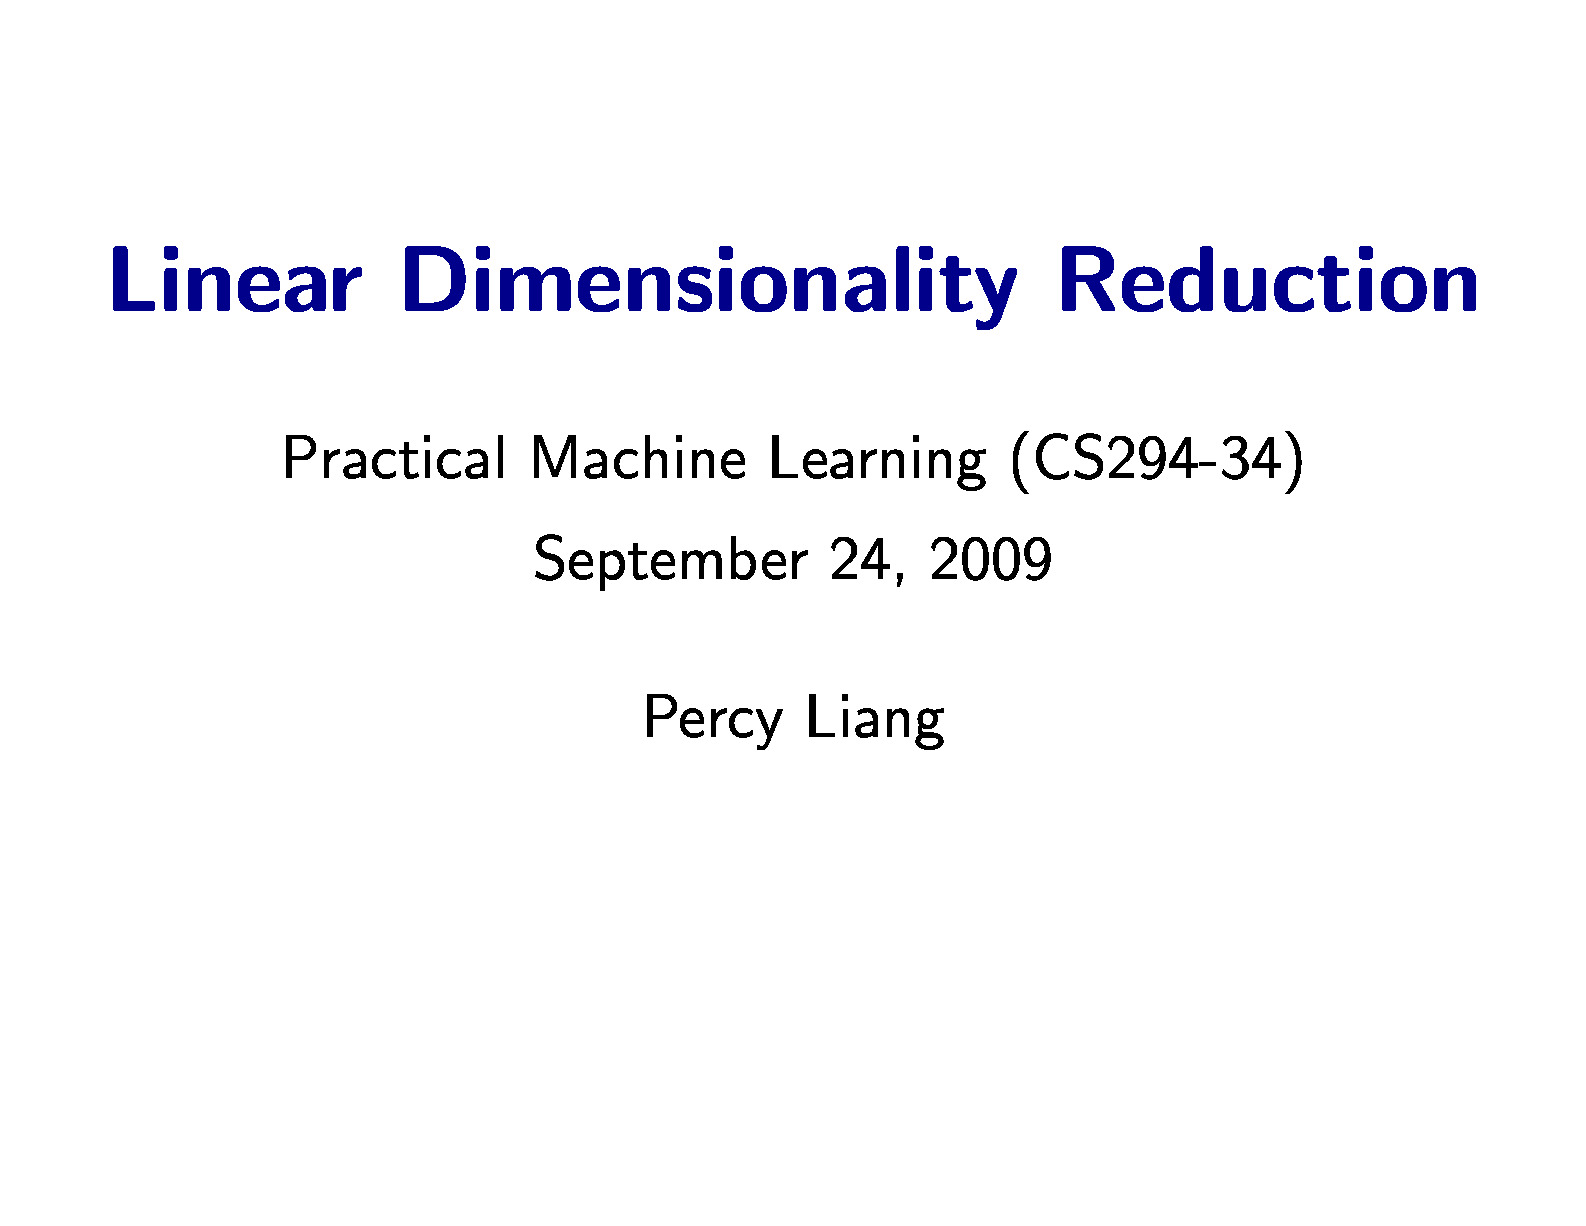 5[Sep 24]Dimensionality reduction [Percy Liang]